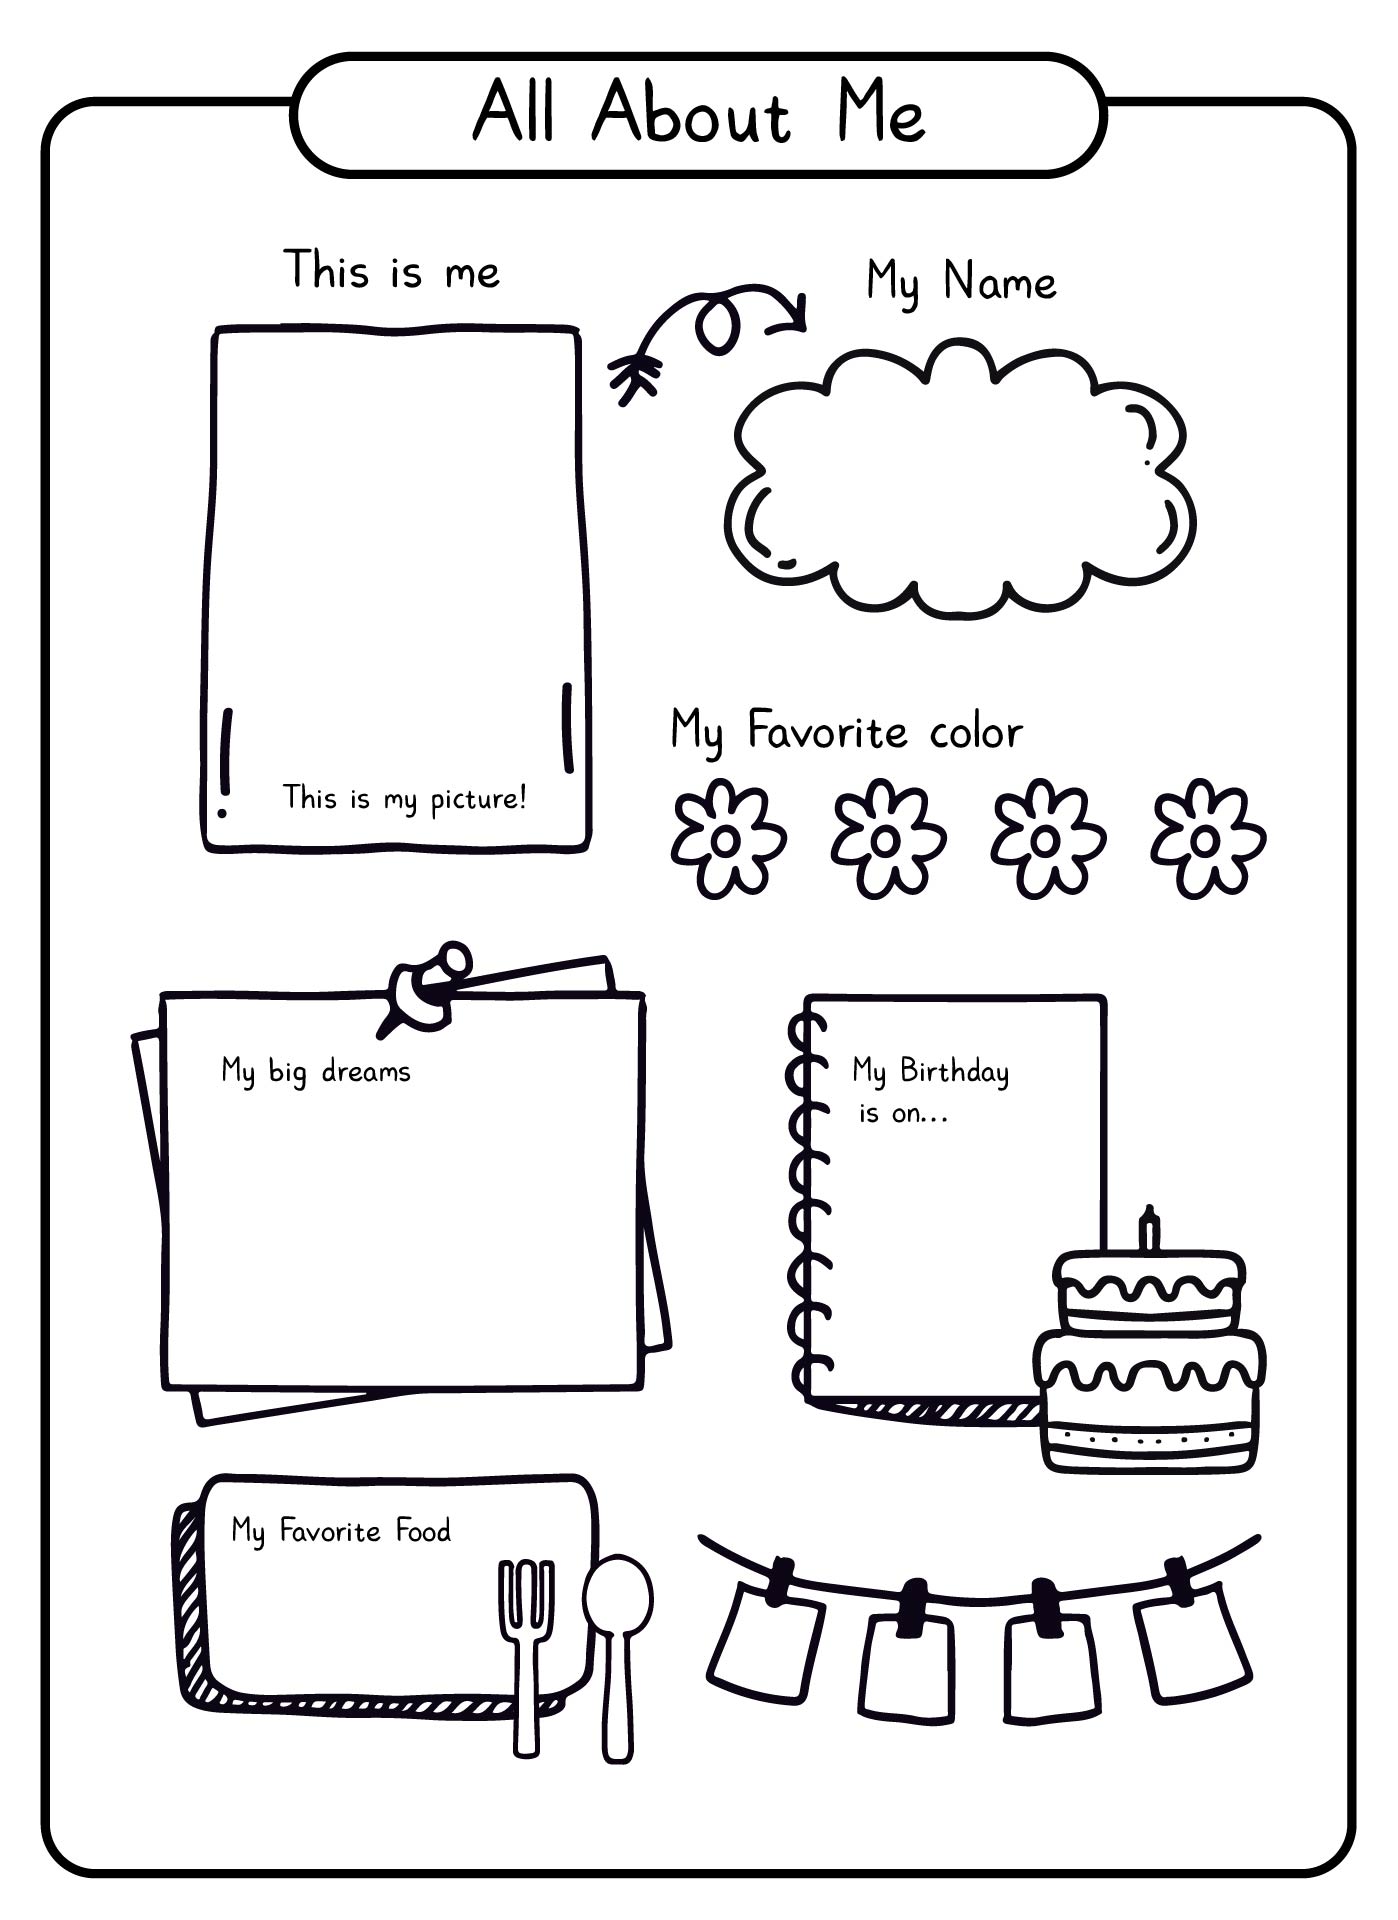 Printable Worksheets About.me